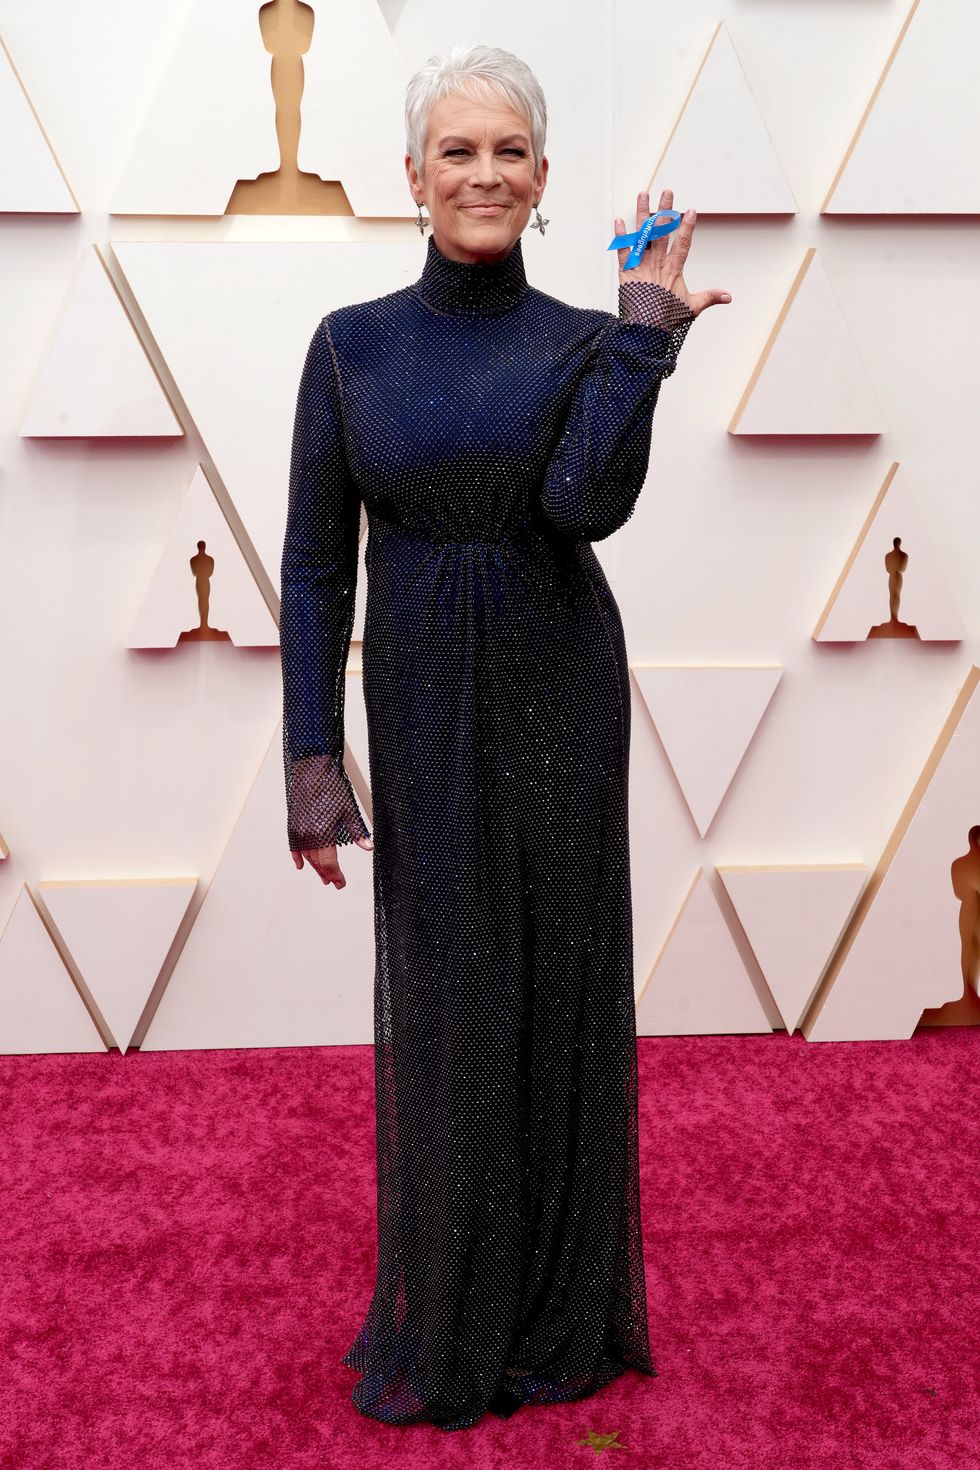 Oscars 2023: Why Are the Stars Wearing Blue Ribbons?